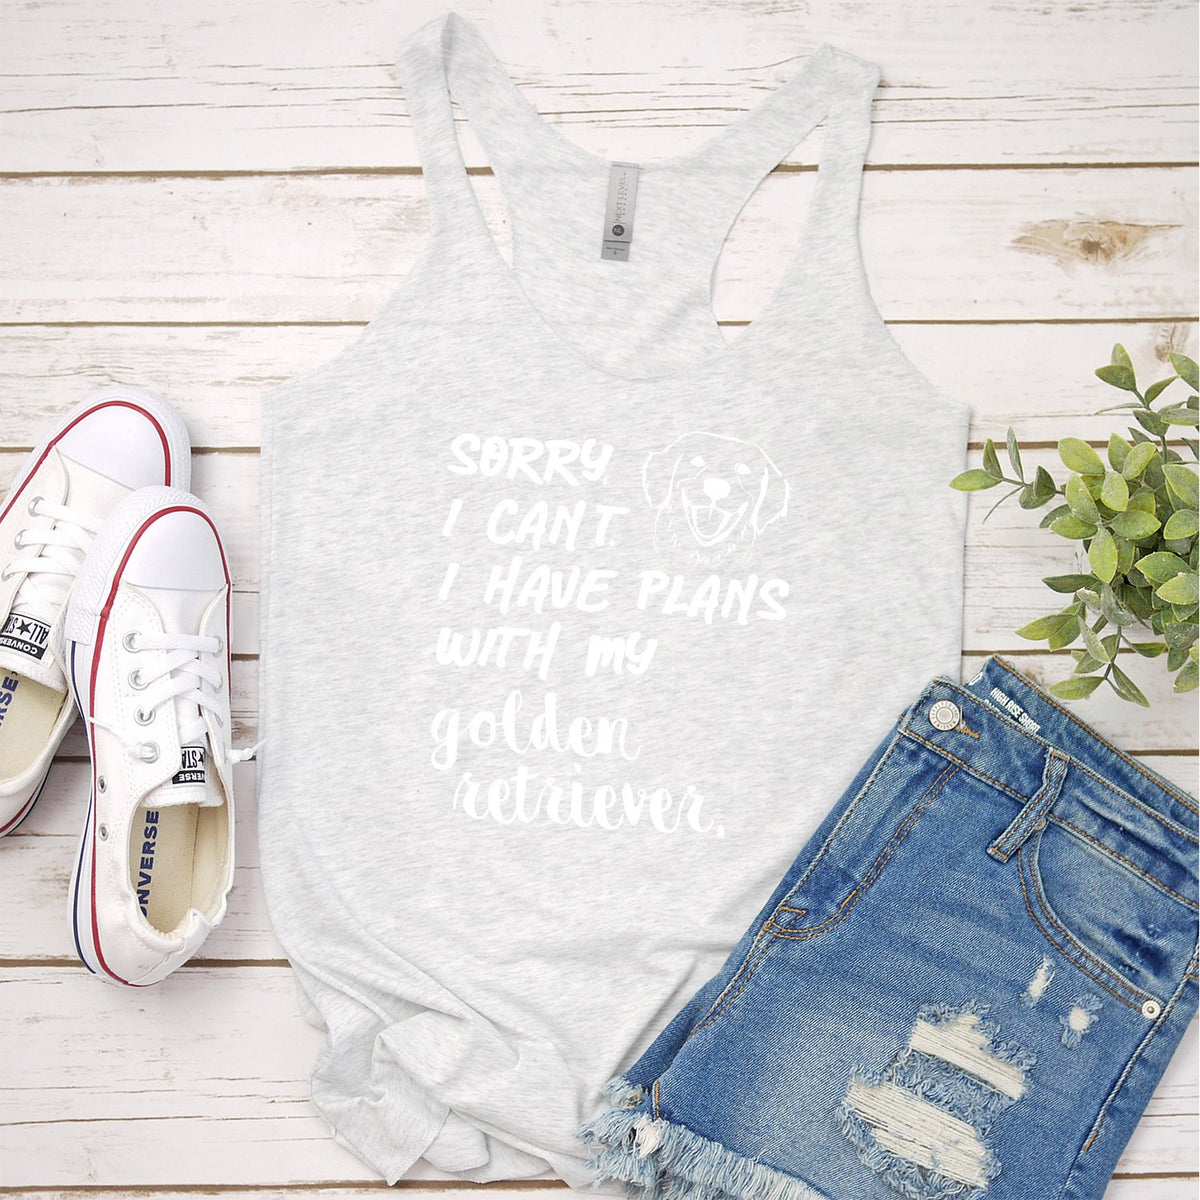 Sorry I Can&#39;t I Have Plans with My Golden Retriever - Tank Top Racerback